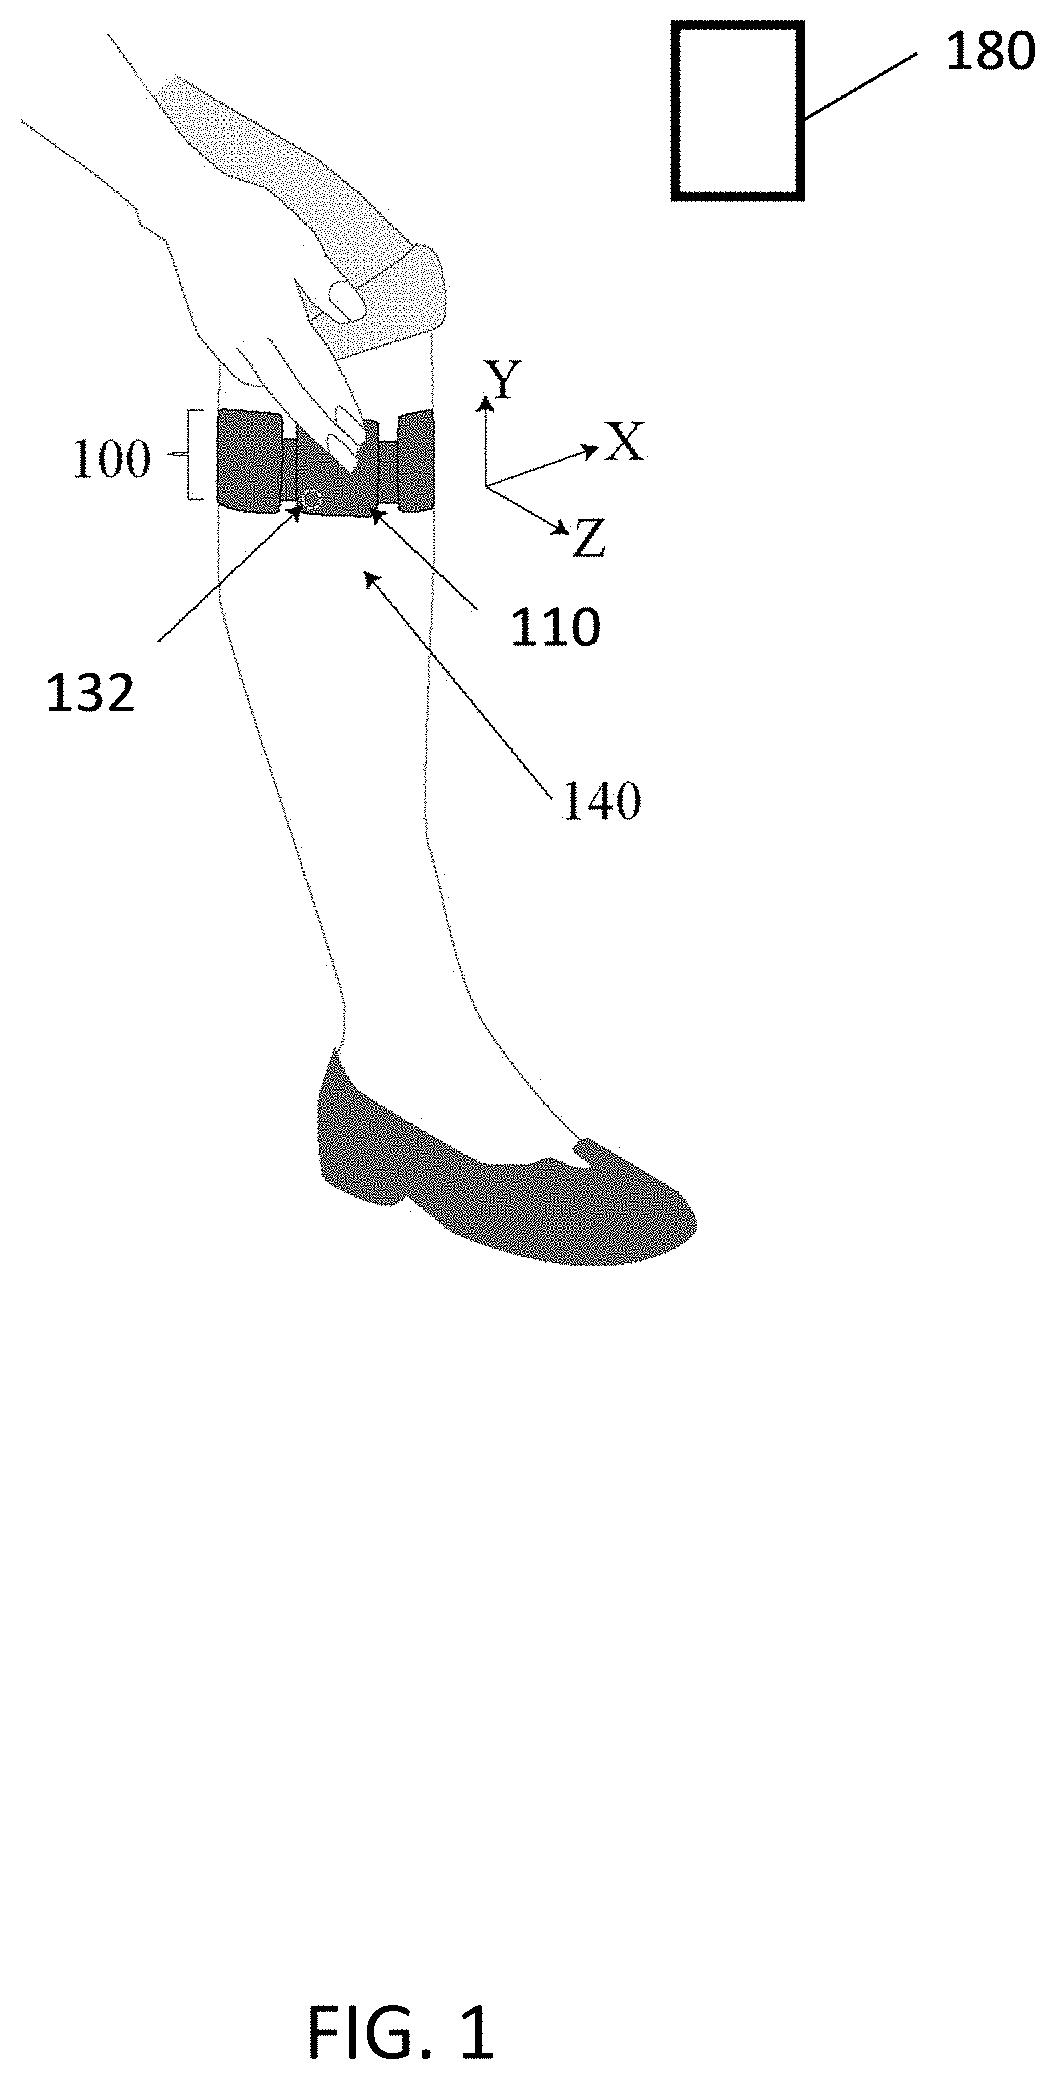 Apparatus and method for button-free control of a wearable transcutaneous electrical nerve stimulator using interactive gestures and other means